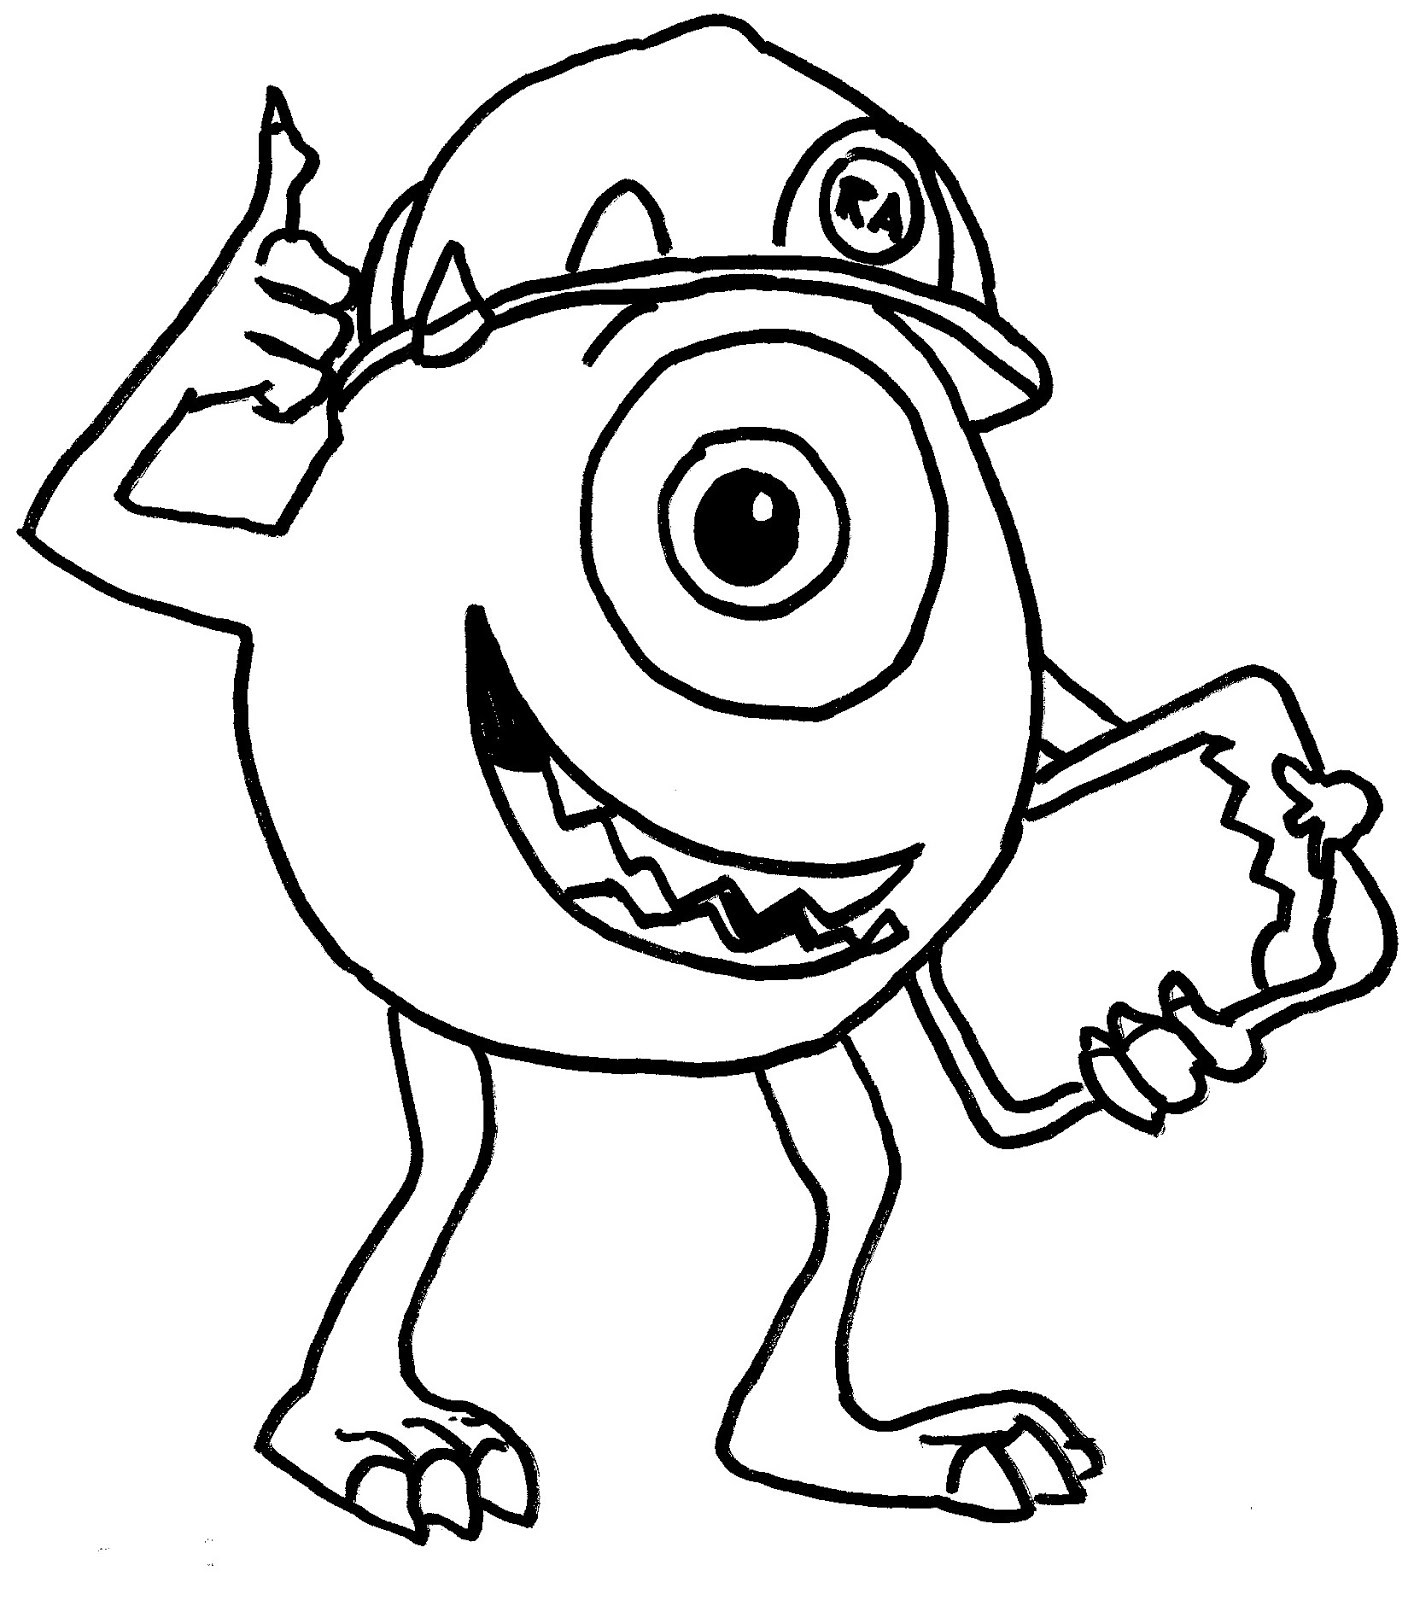 Disney Coloring Pages Pictures: Monsters, Inc Coloring Pages